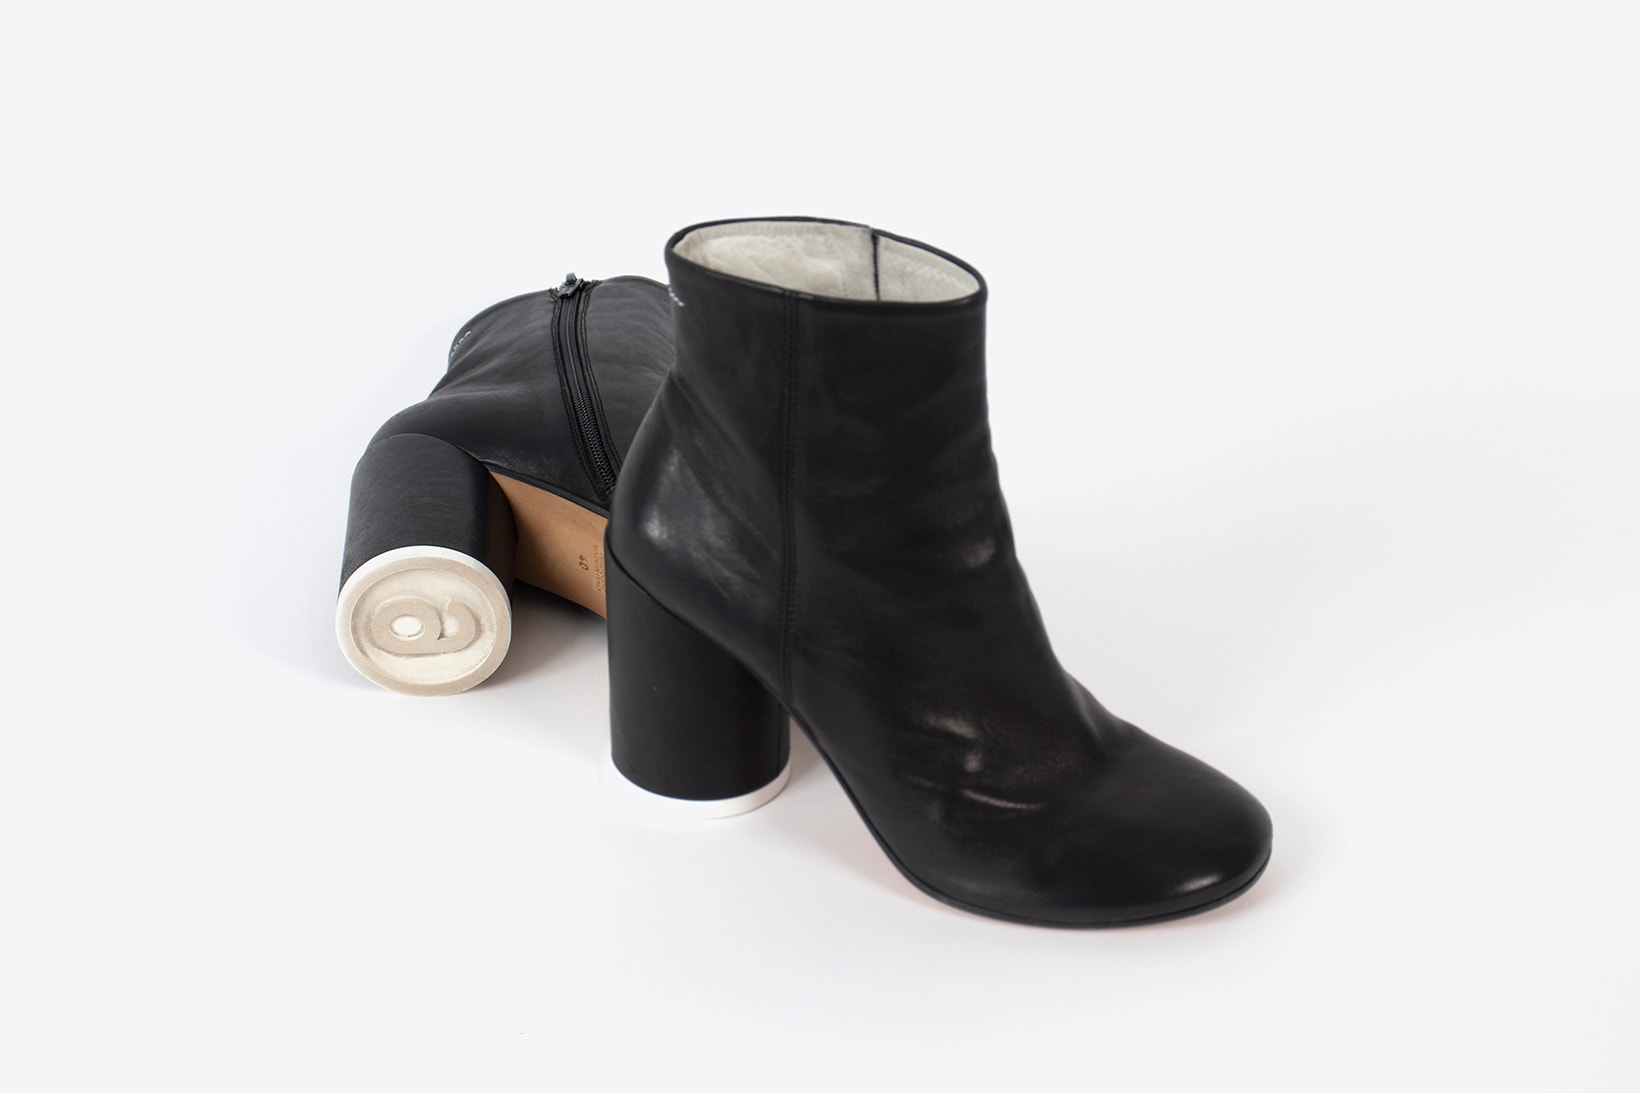 mm6 maison margiela fall winter stamp collection jewelry accessories boots shoes